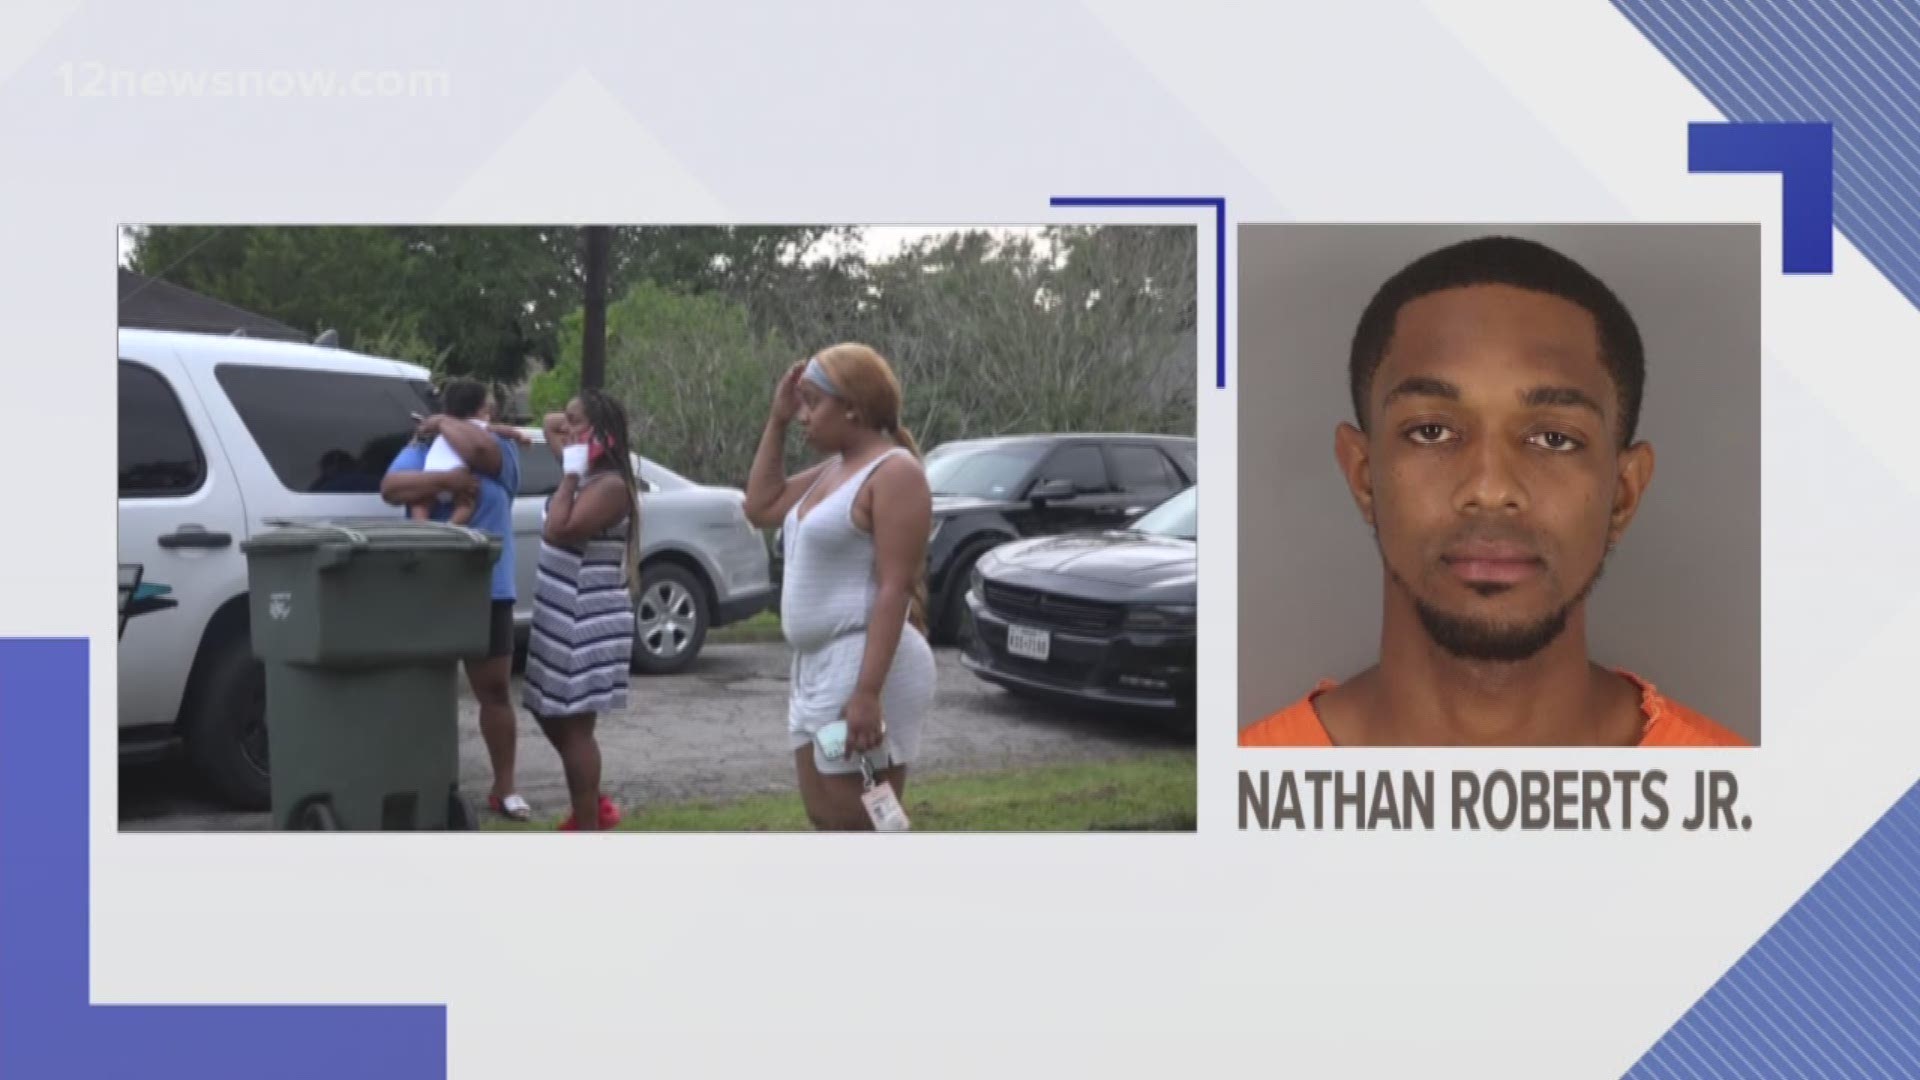 Nathan Robert was arrested on Monday